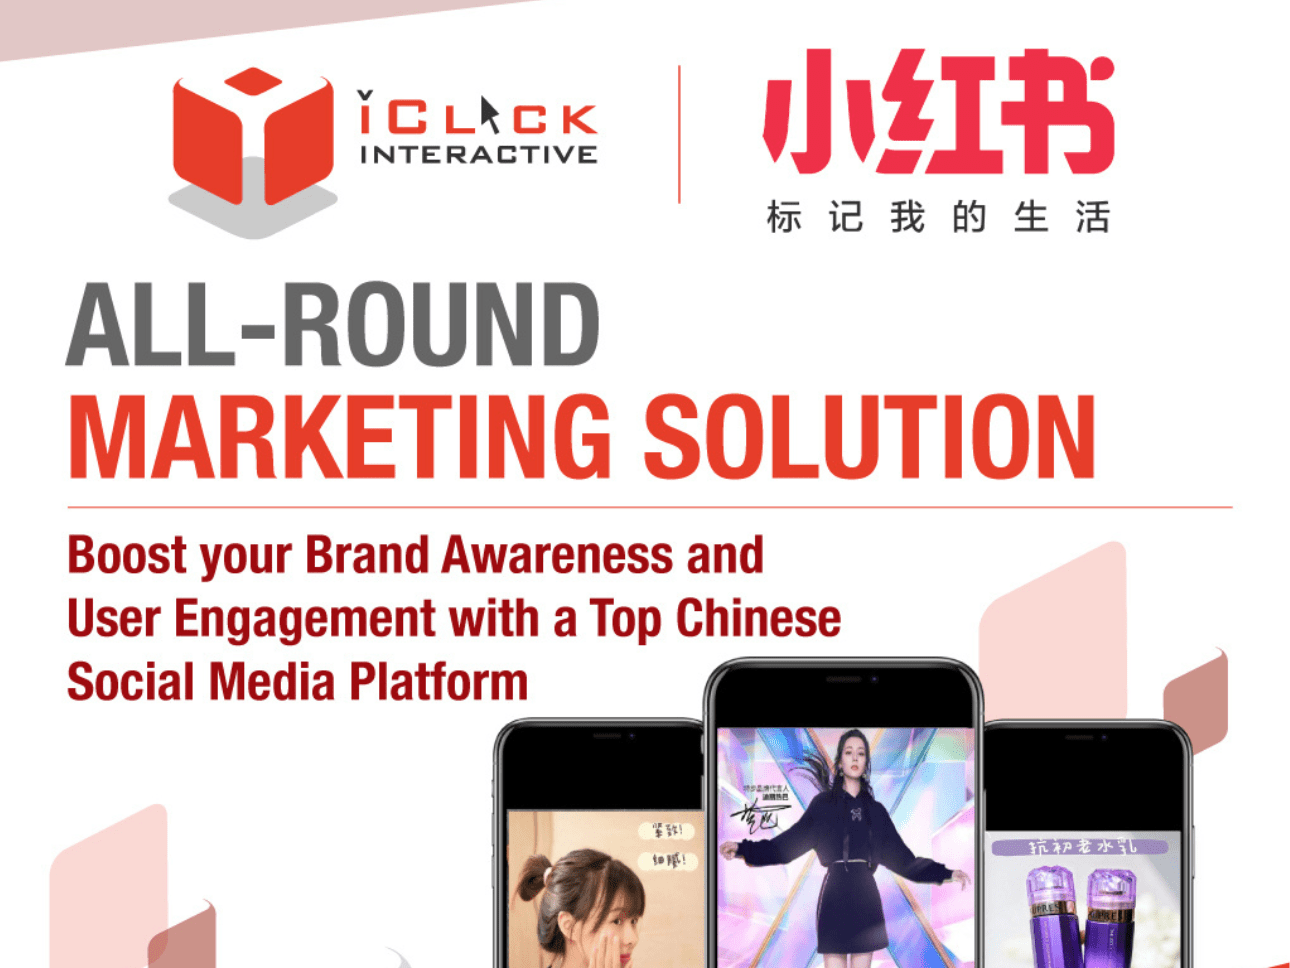 iClick X XHS: All-round Marketing Solution